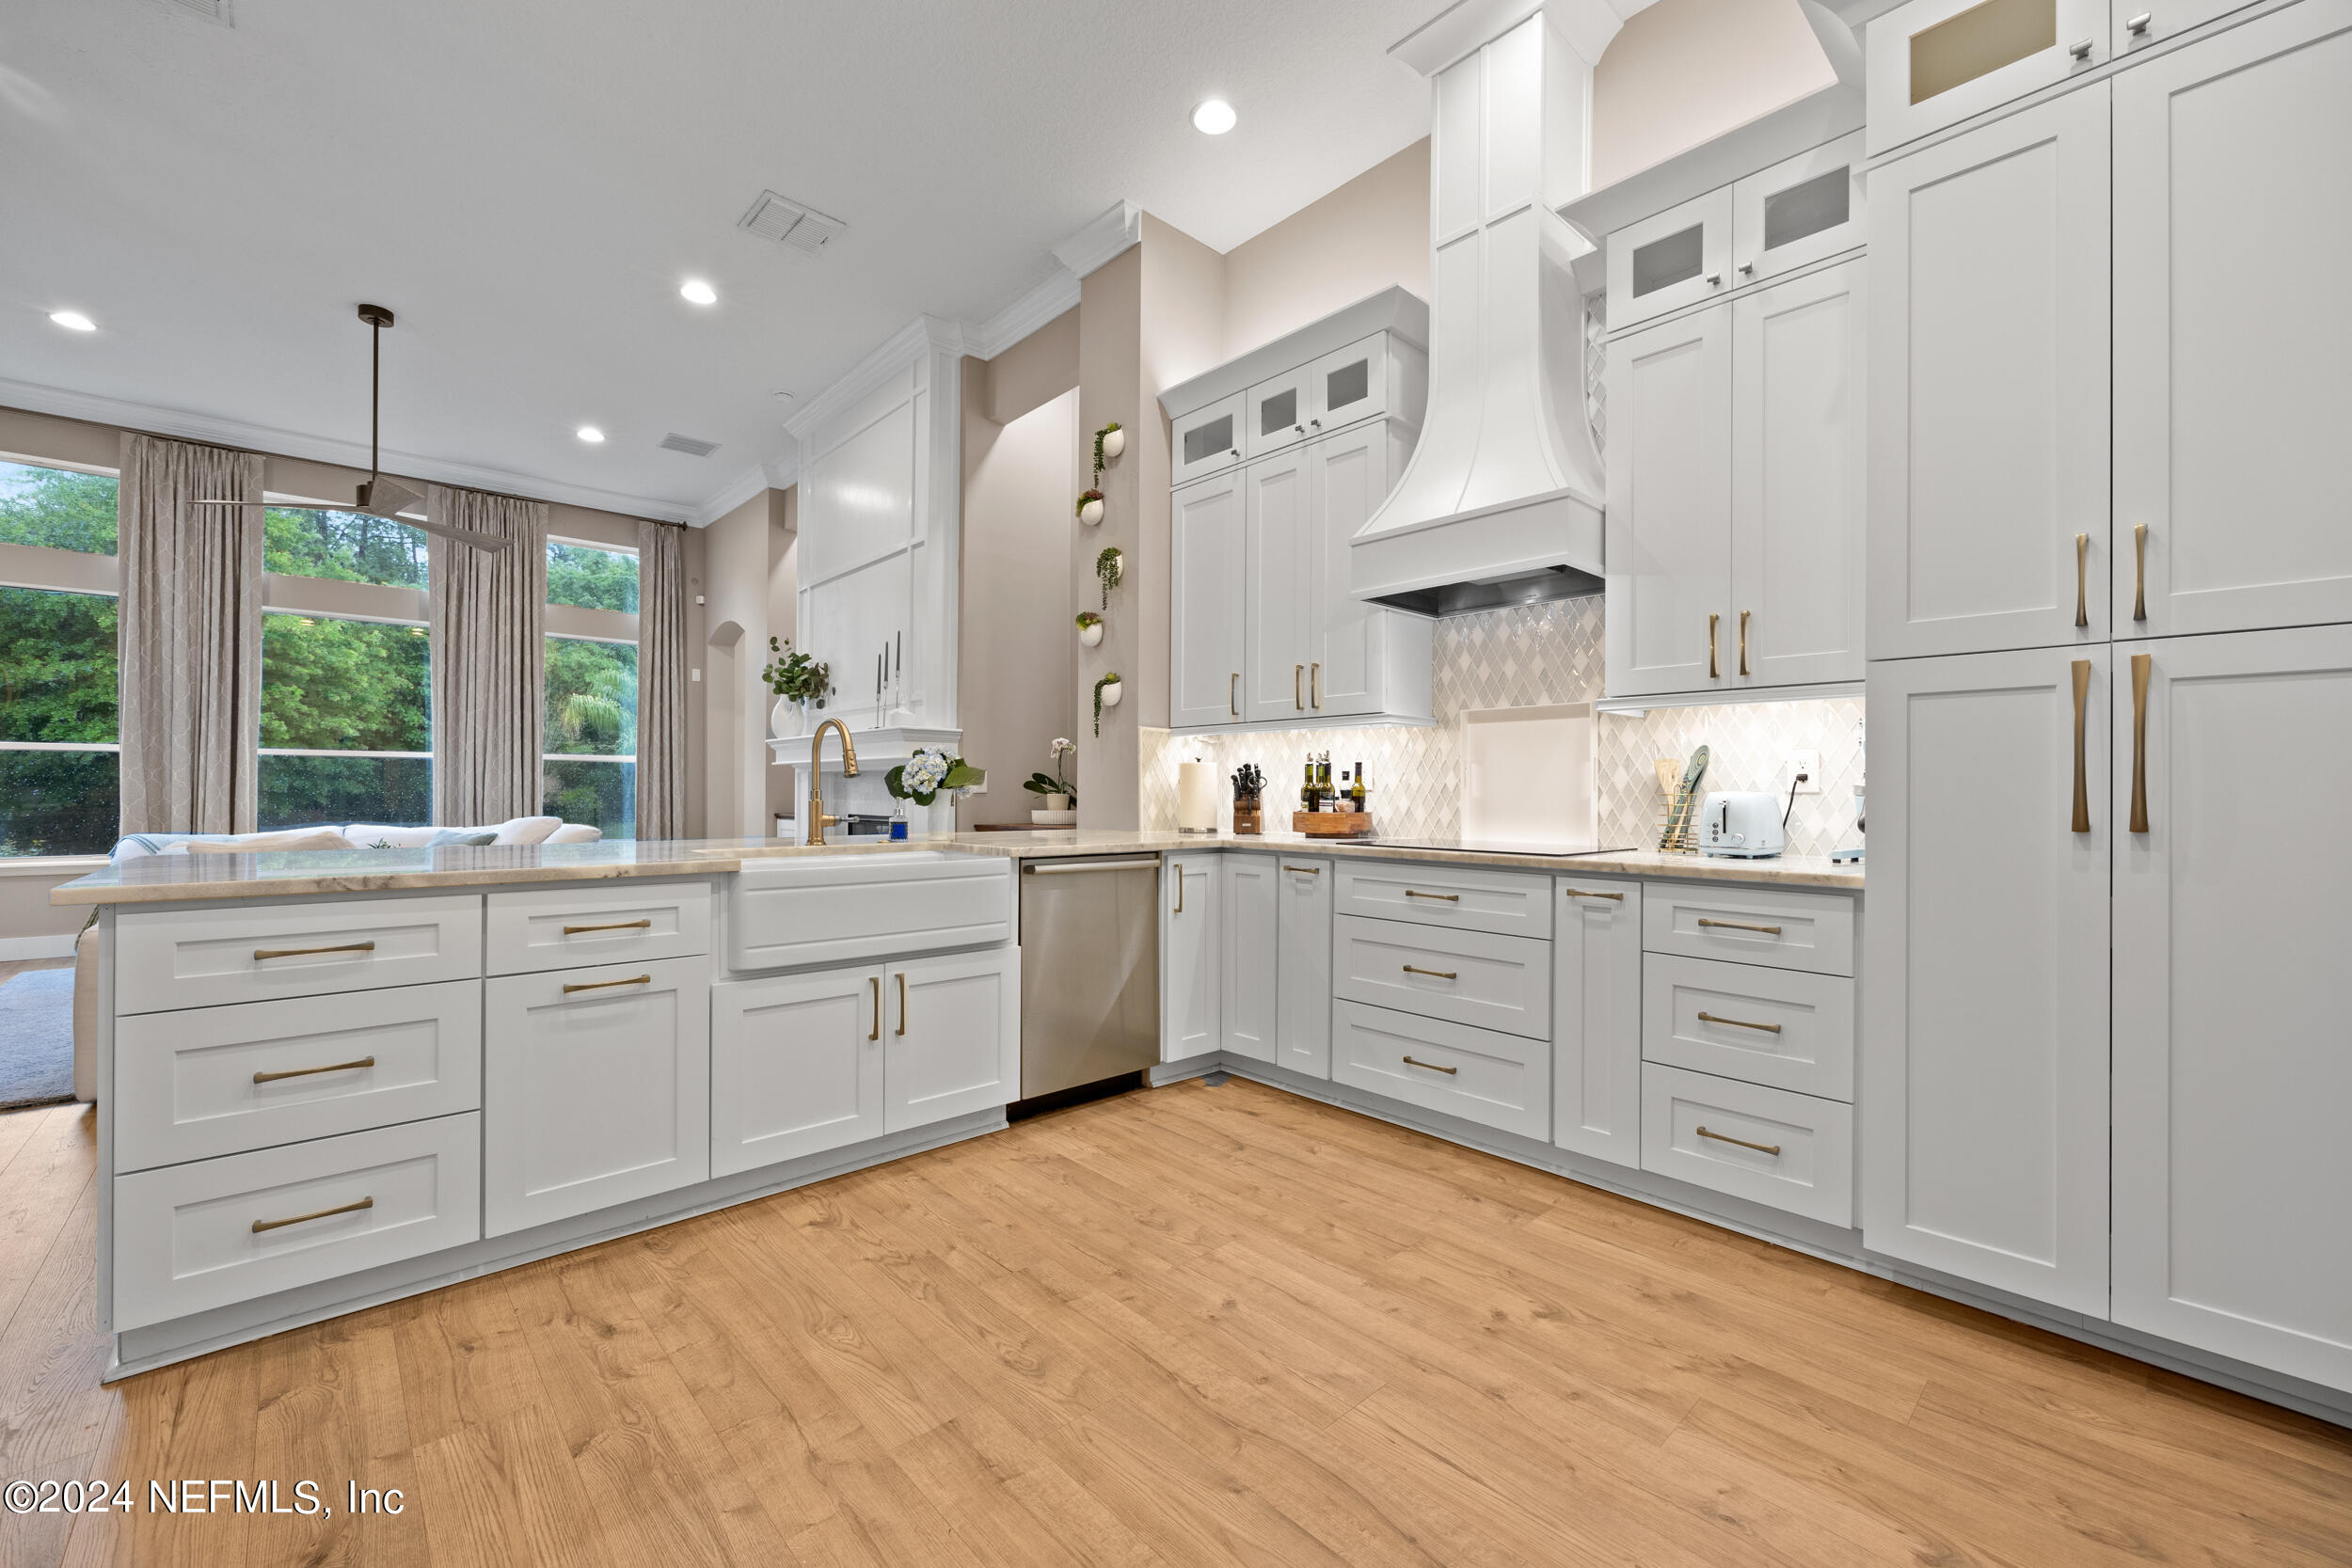 a open kitchen with white cabinets and stainless steel appliances